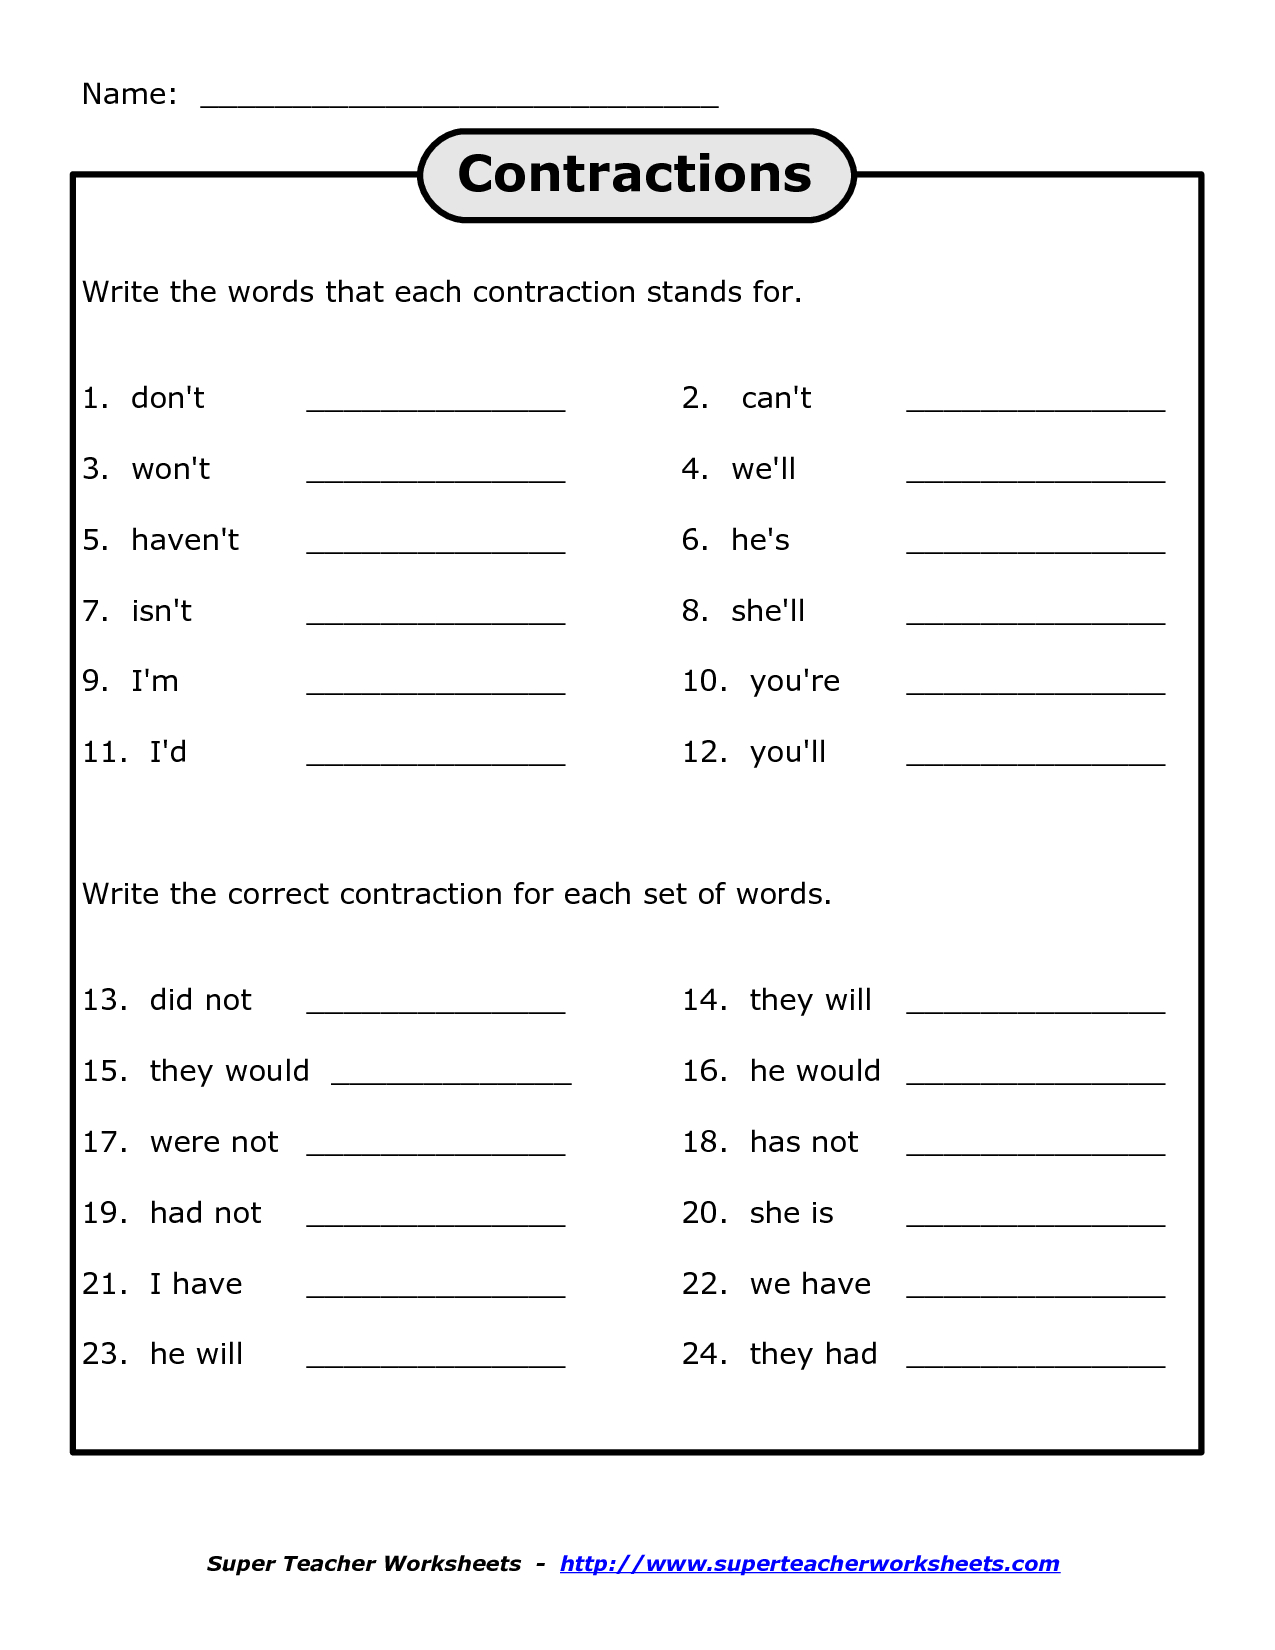 Free Printables For 4Th Grade Science | Free Printable Contraction - Free Printable Worksheets For 4Th Grade